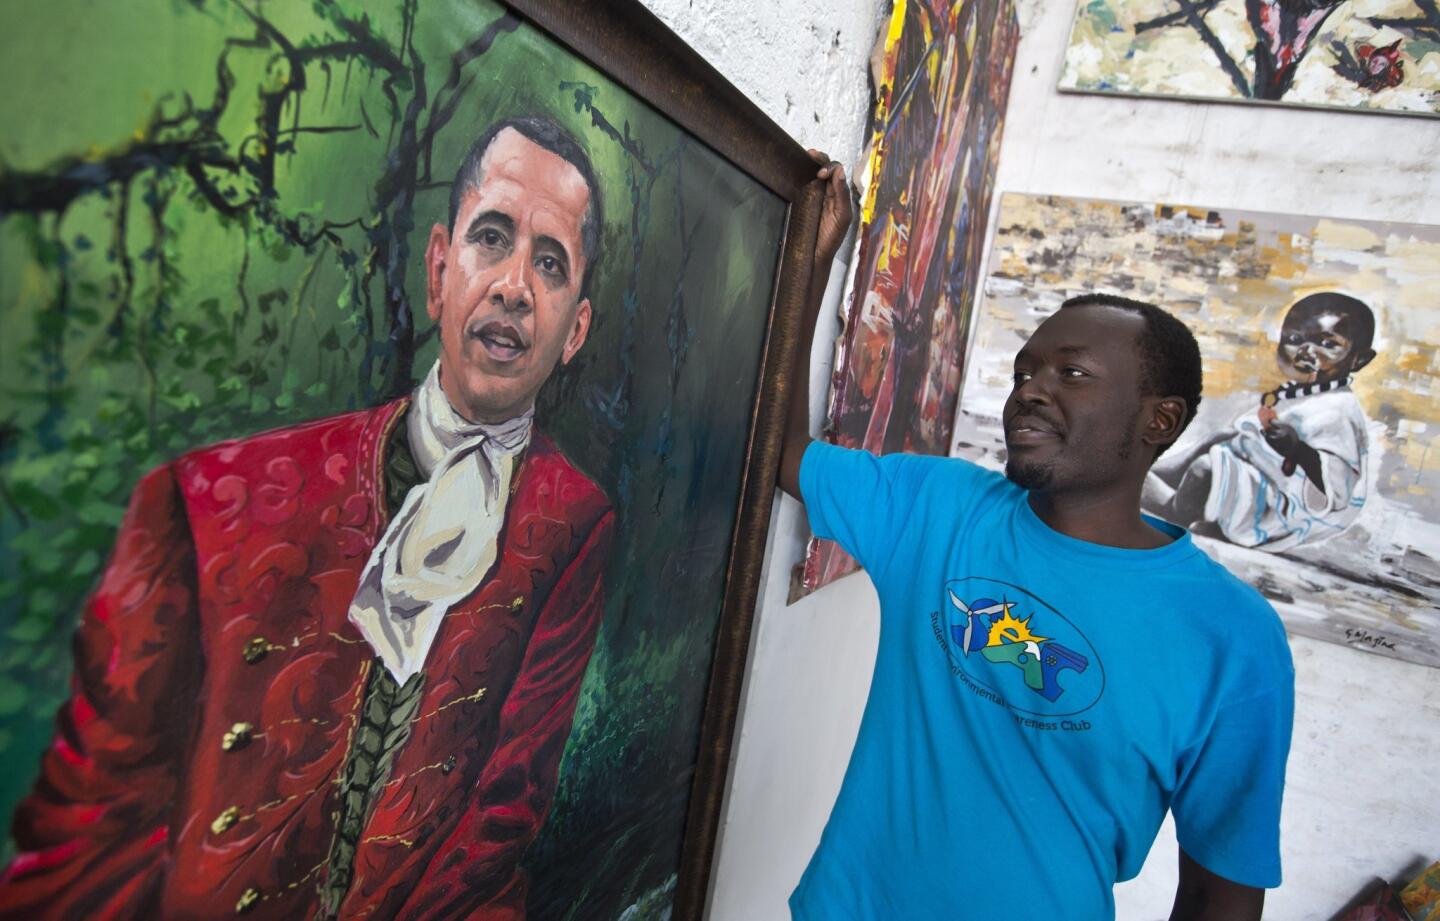 Images of Obama across Africa